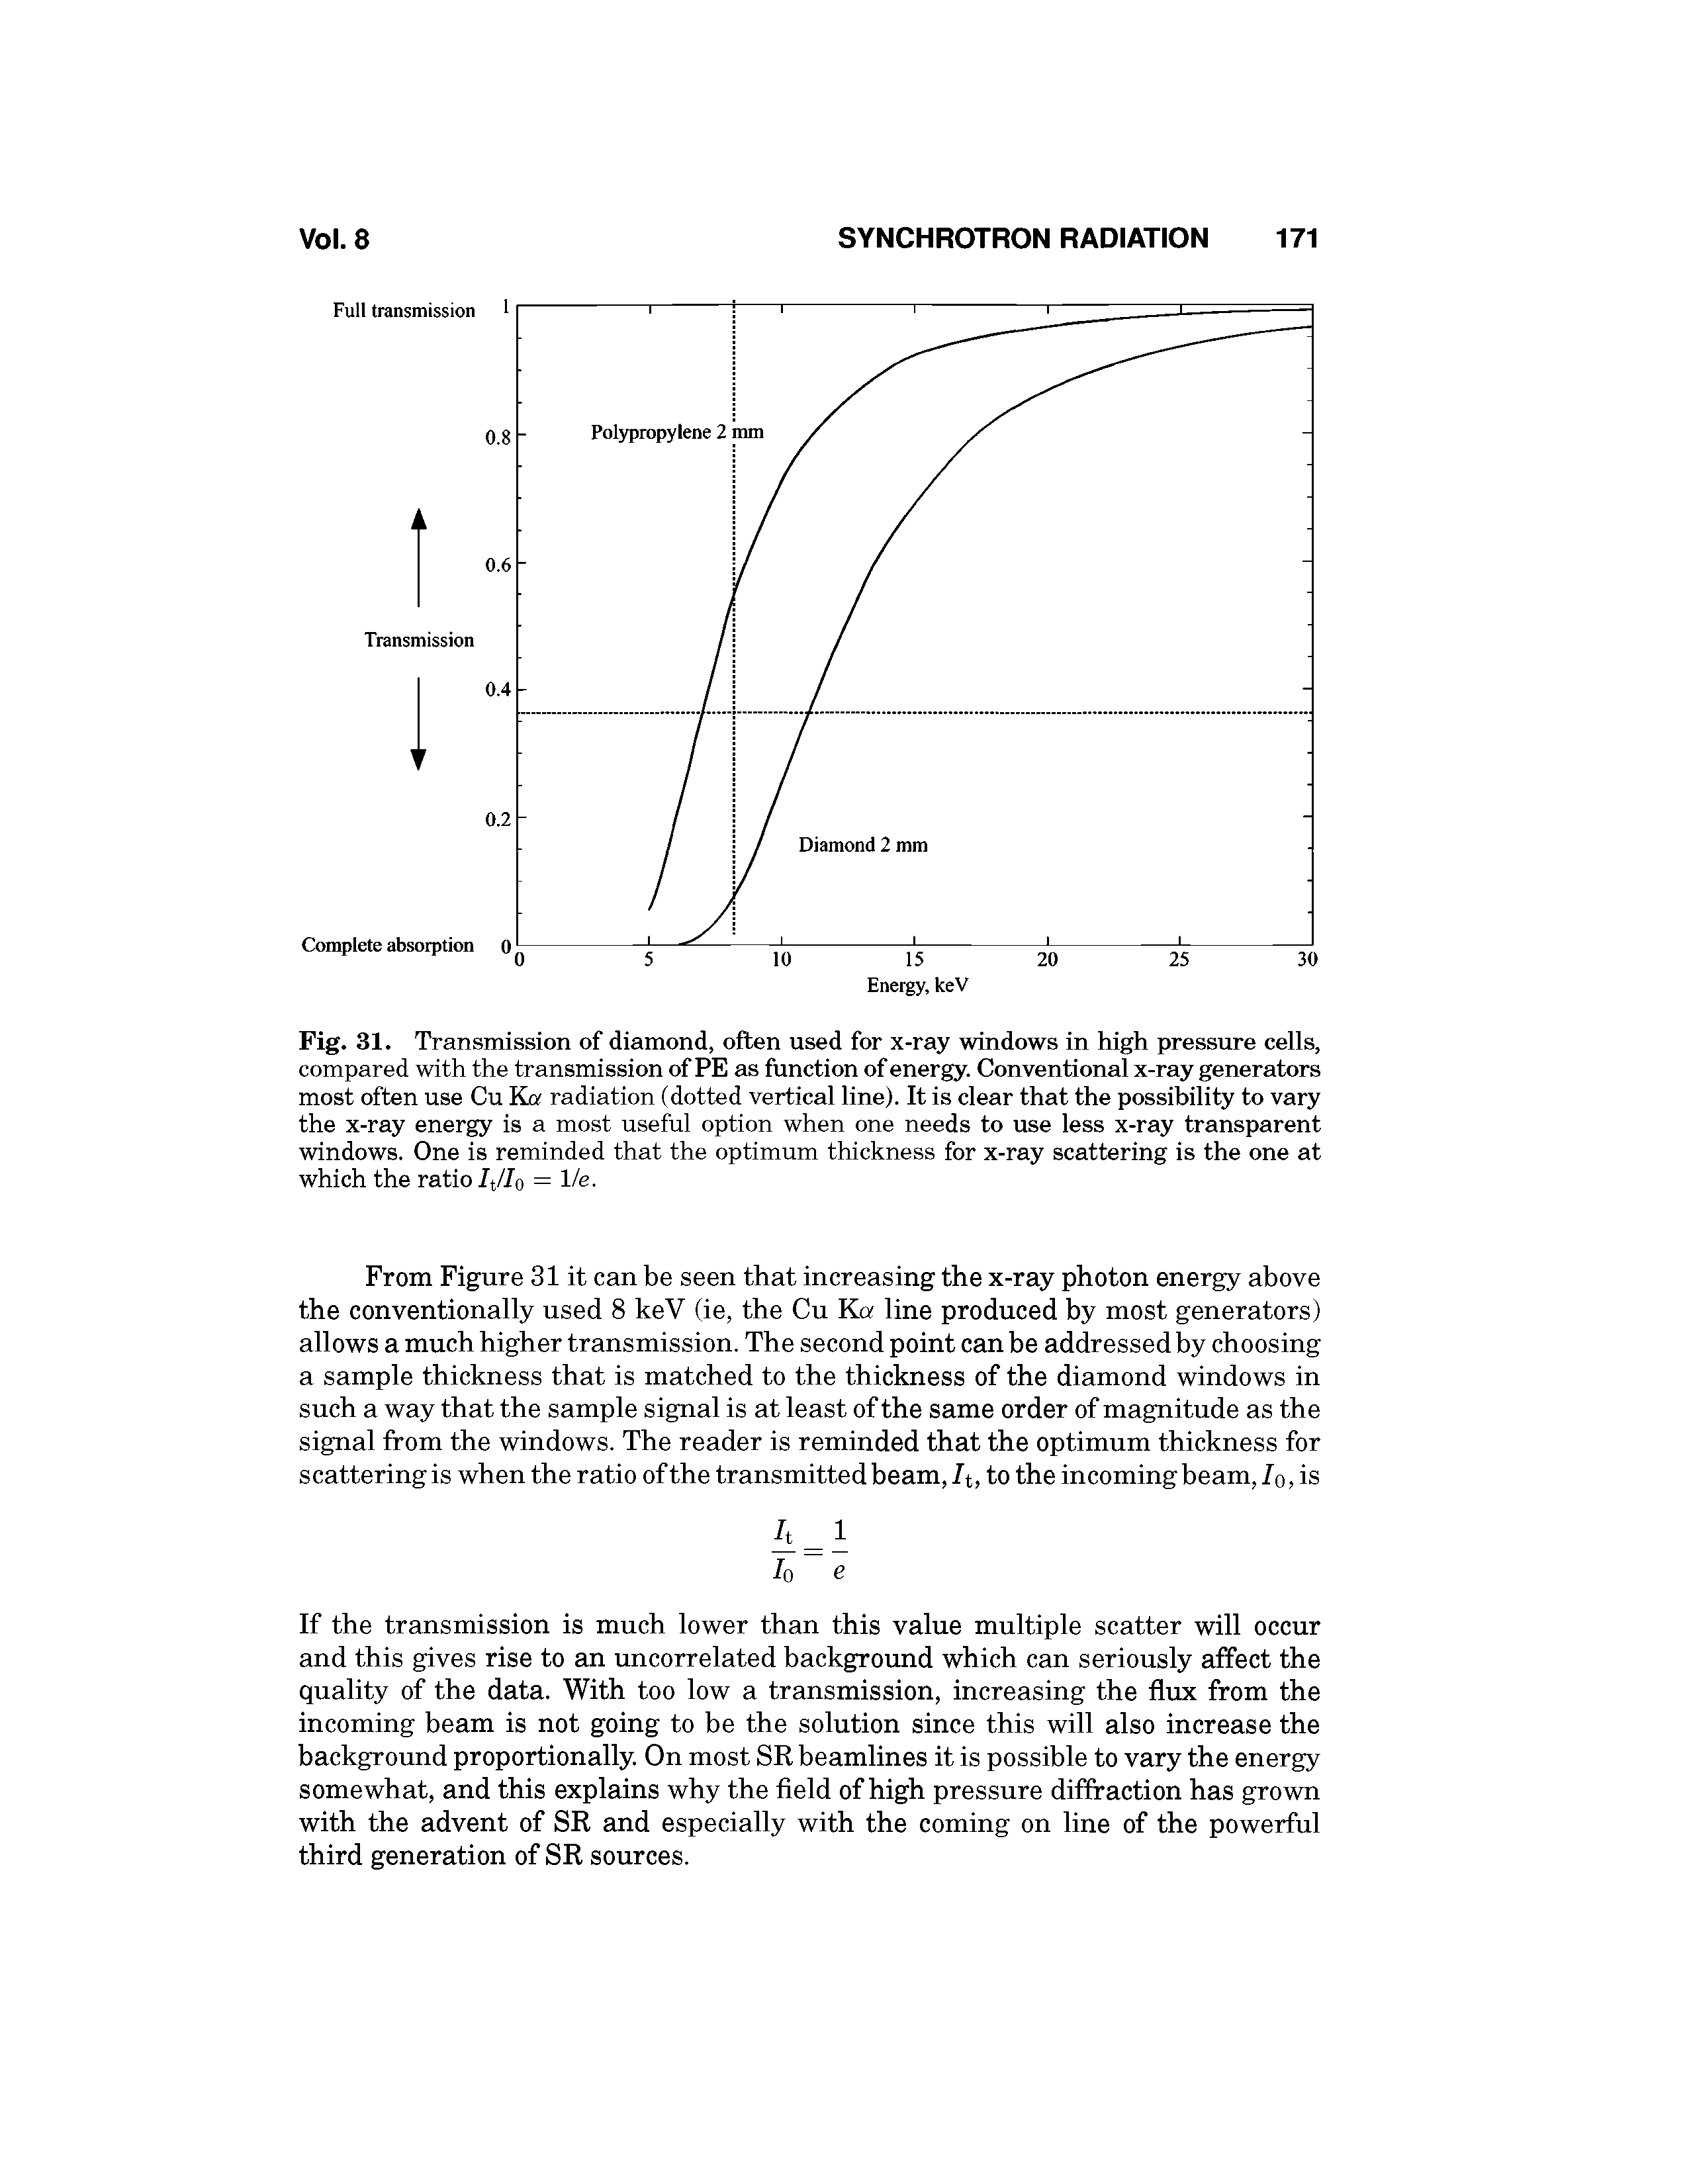 Fig. 31. Transmission of diamond, often used for x-ray windows in high pressure cells, compared with the transmission of PE as function of energy. Conventional x-ray generators most often use Cu Ka radiation (dotted vertical line). It is clear that the possibility to vary the x-ray energy is a most useful option when one needs to use less x-ray transparent windows. One is reminded that the optimum thickness for x-ray scattering is the one at which the ratio It/Io = 1/e.